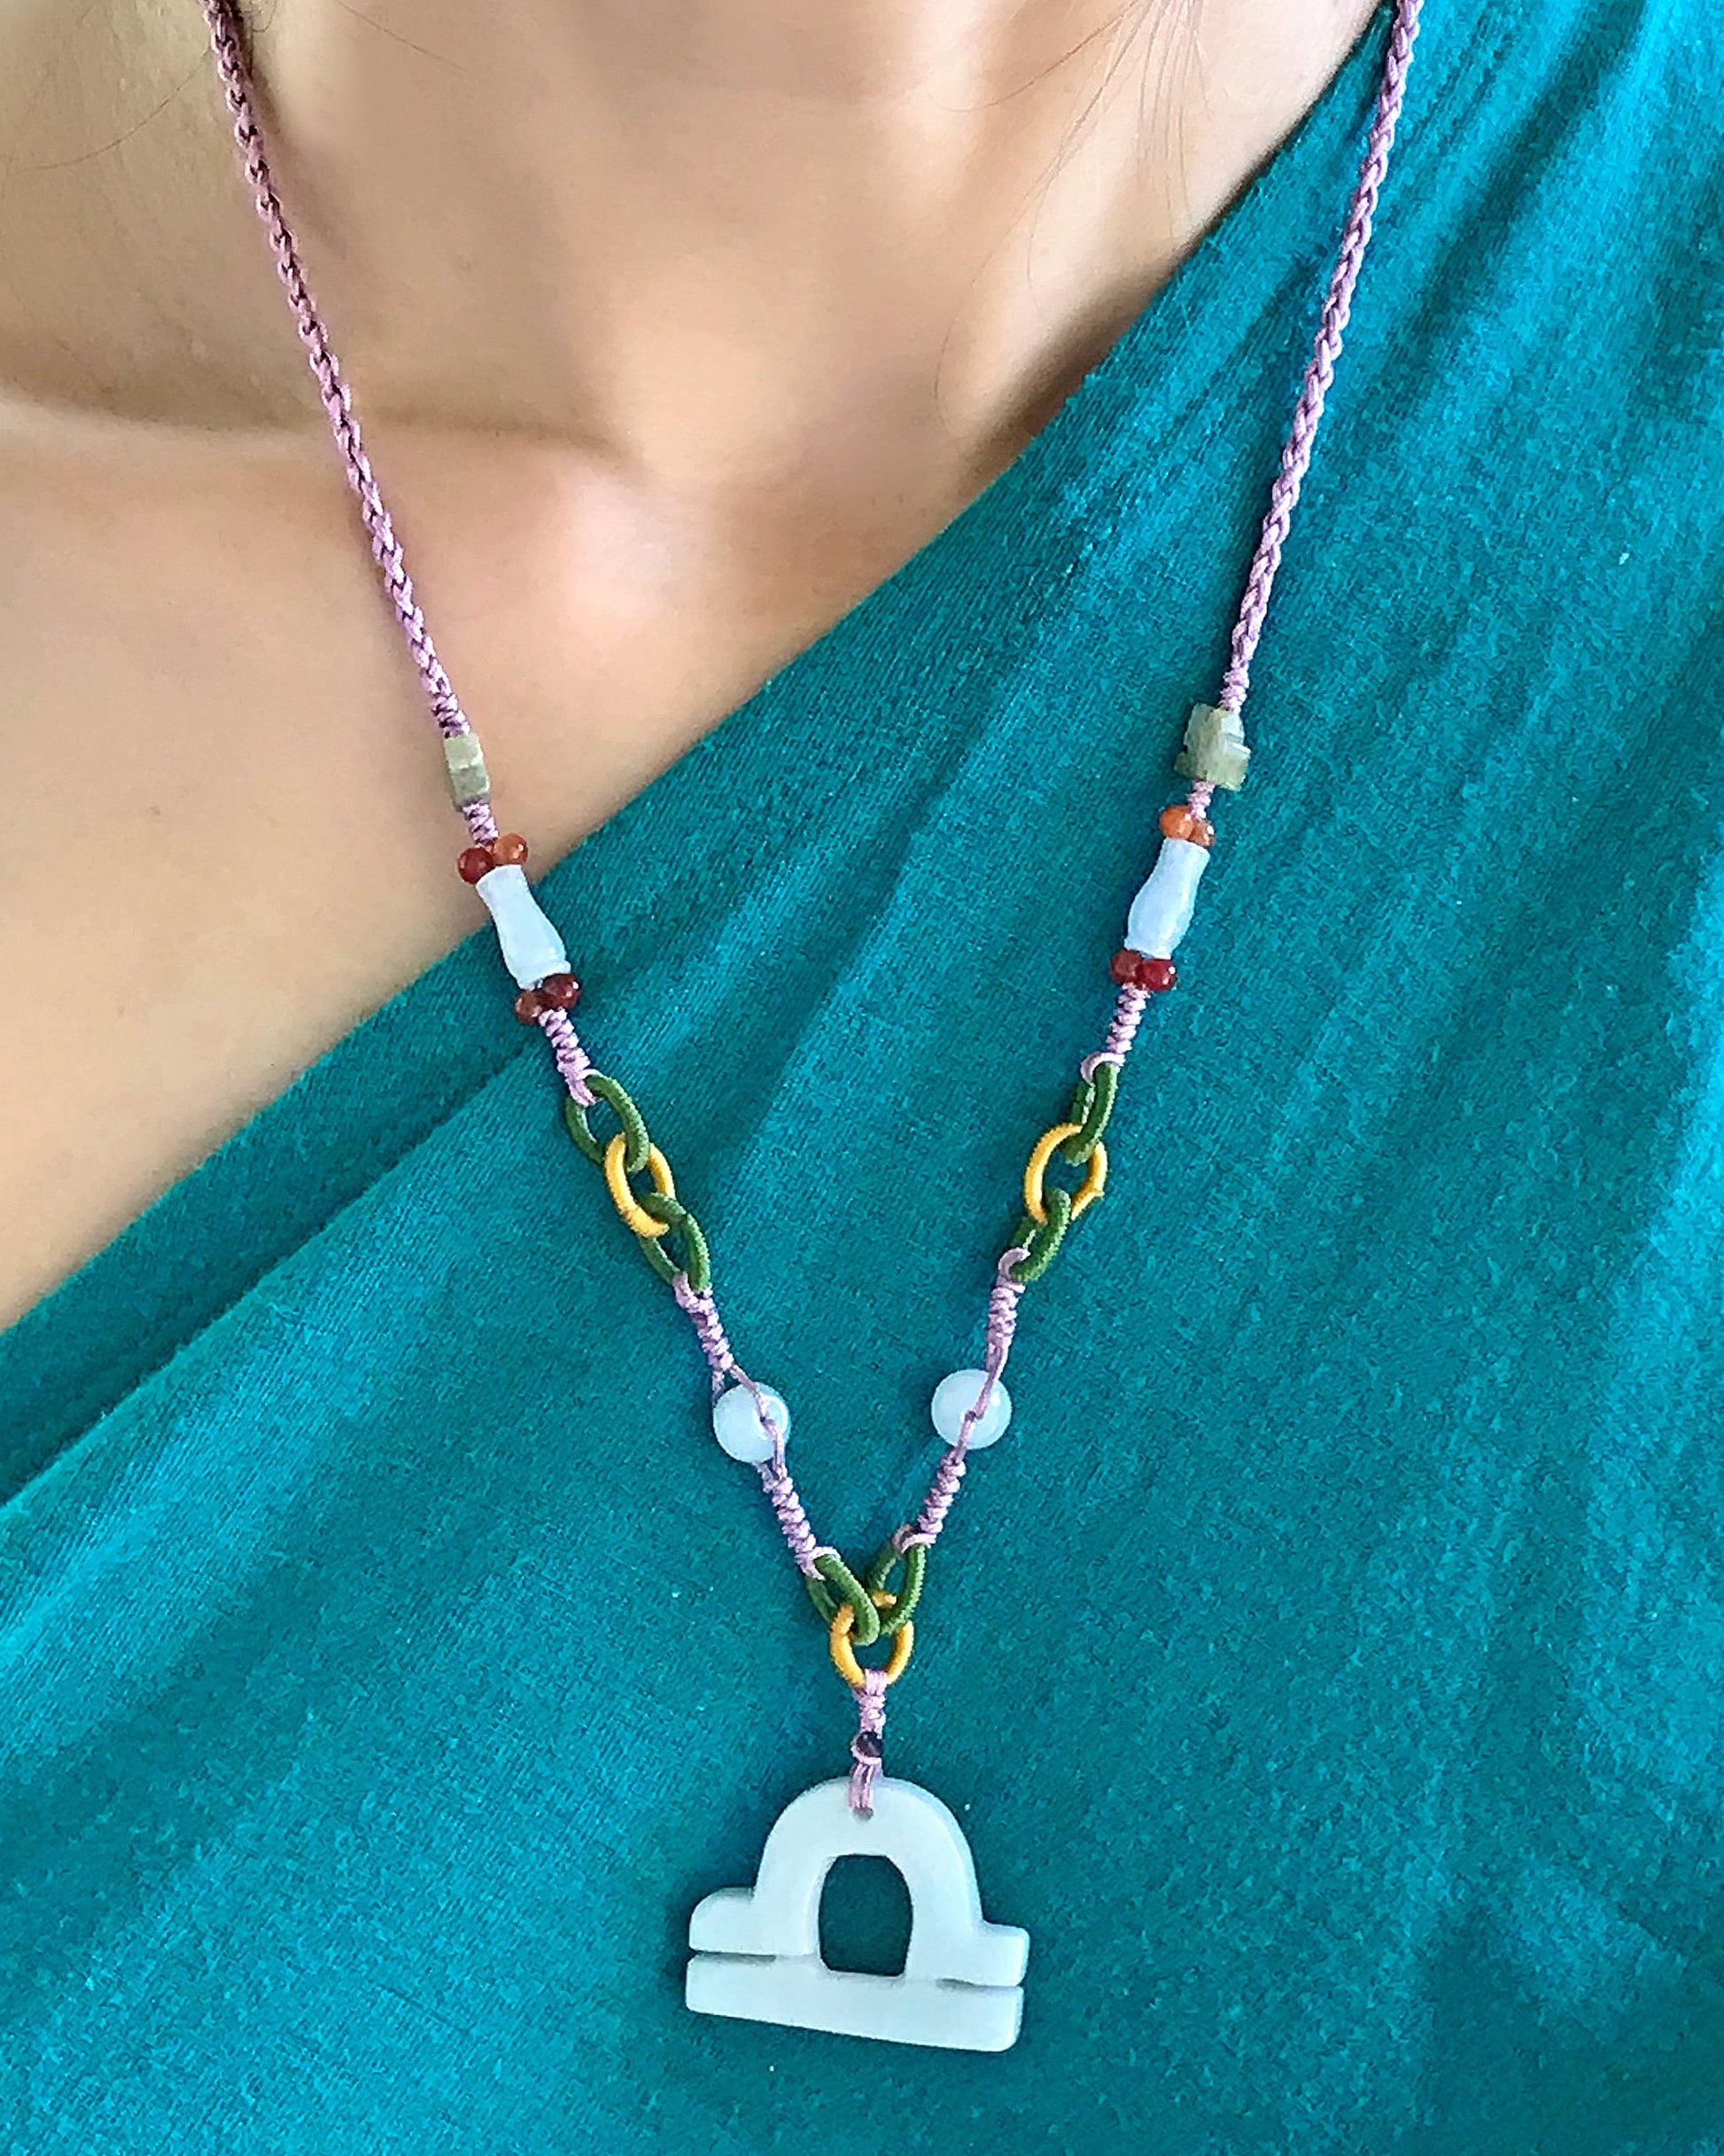 Get the Perfect Get the Perfect Gift for the Libra in Your Life with Jade Necklace made with Lavender Cord